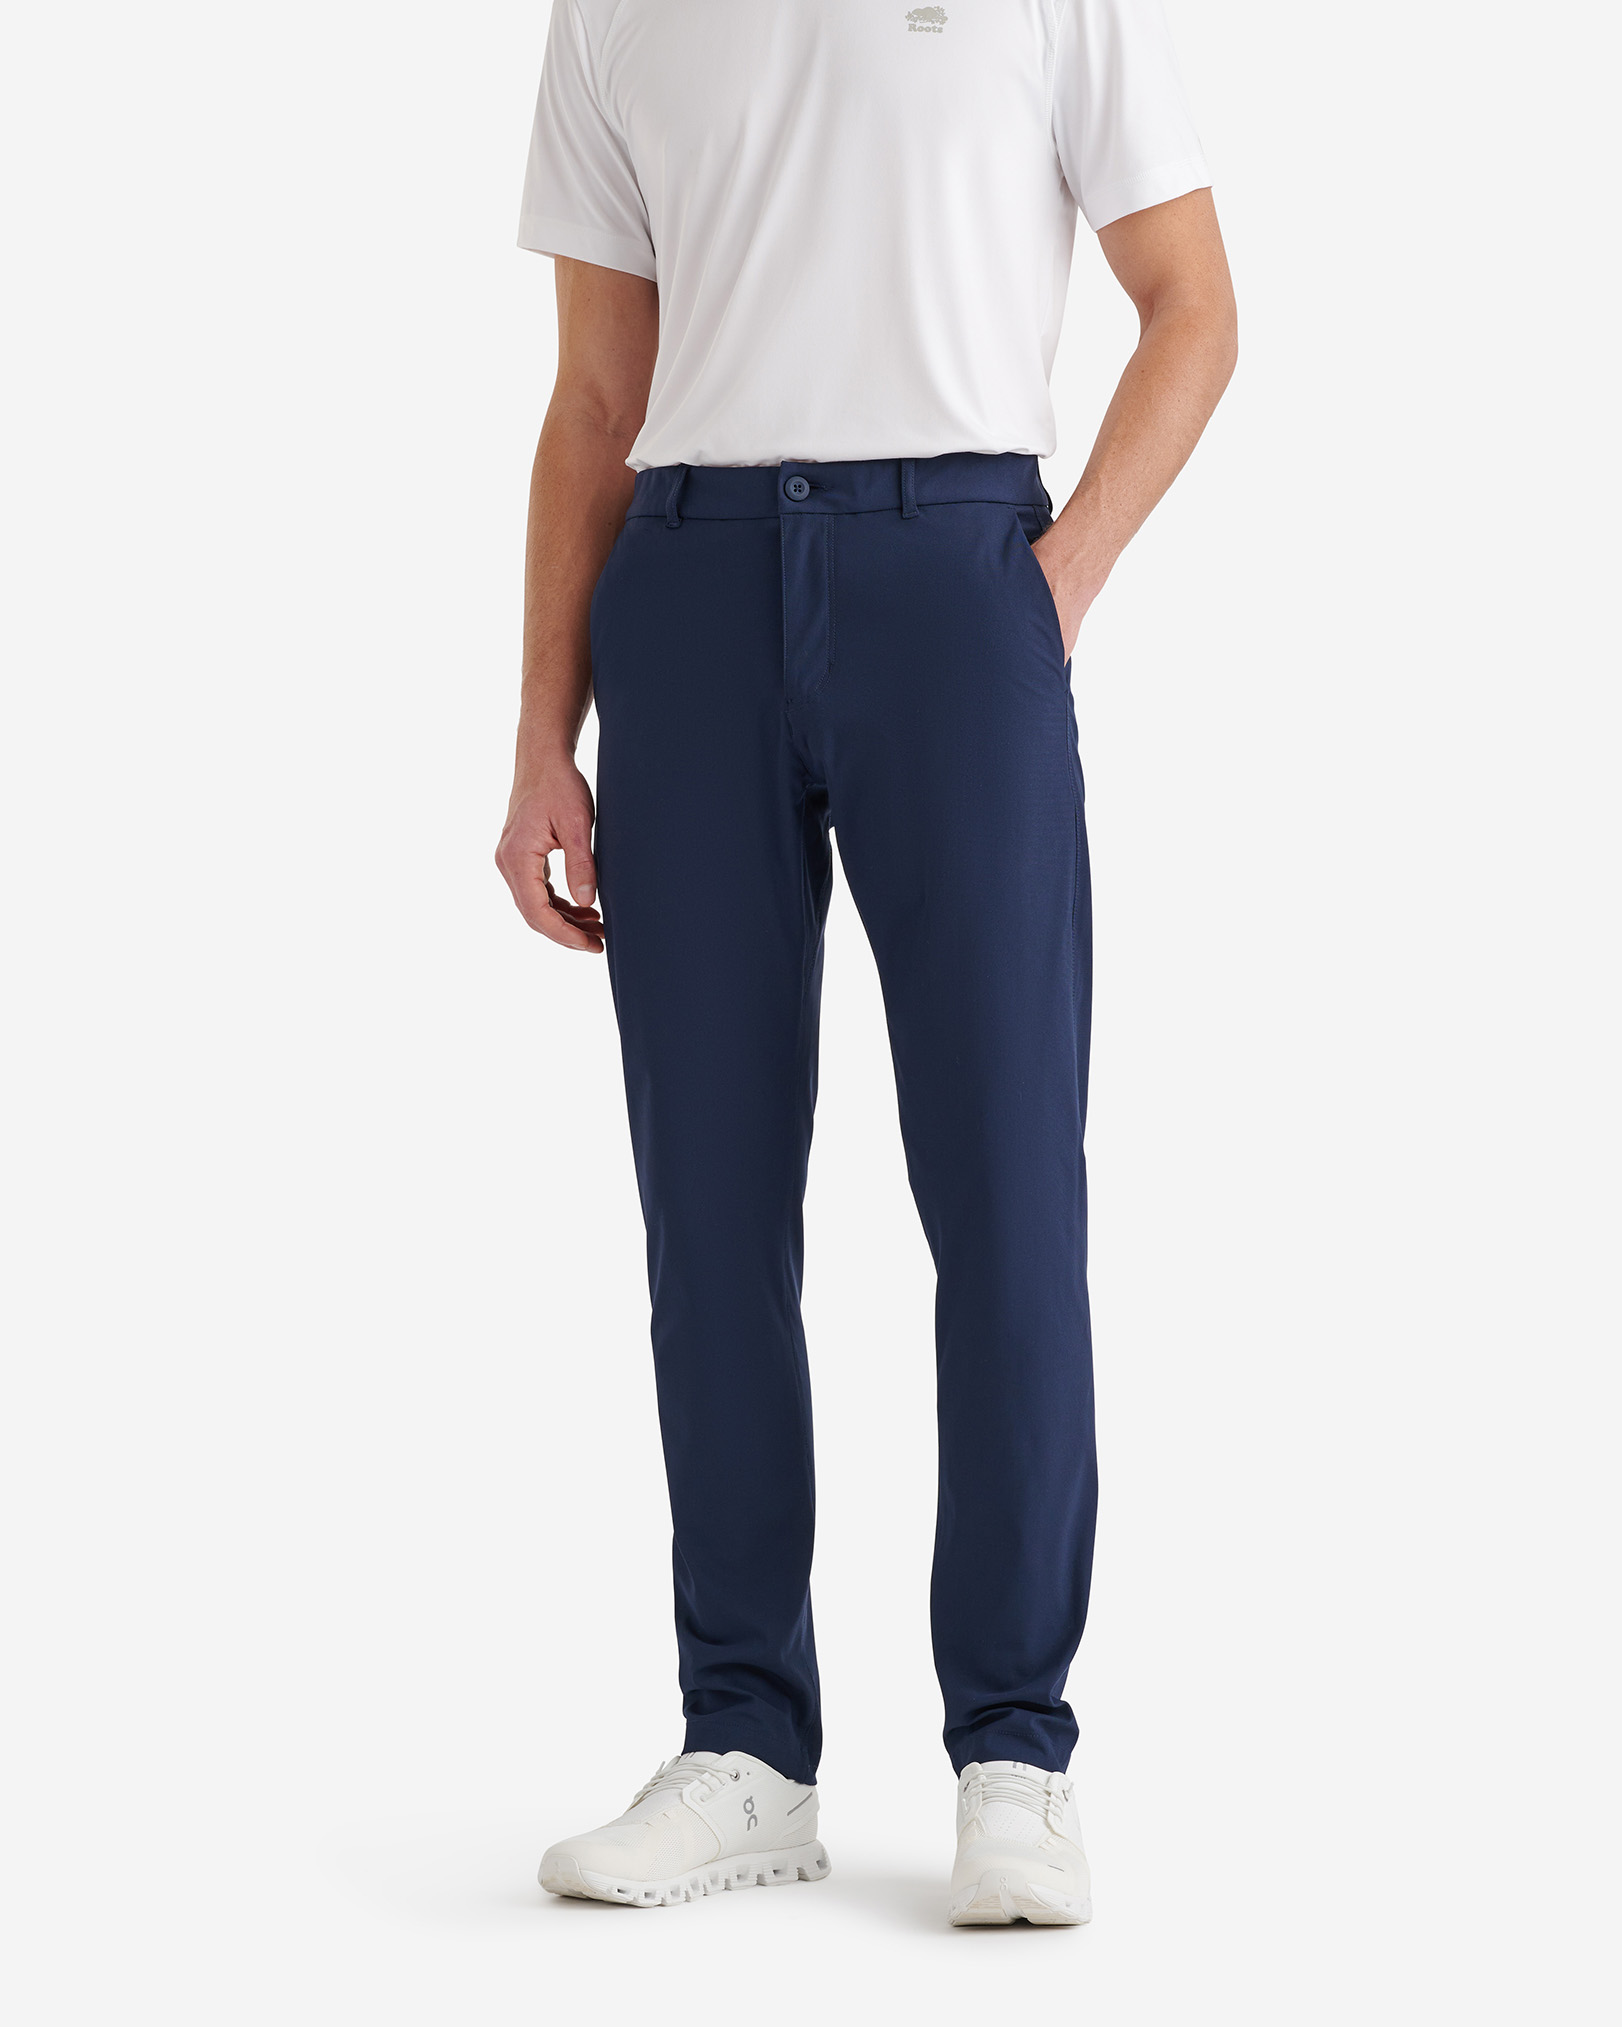 Roots Park Tech Pant in Navy Blazer